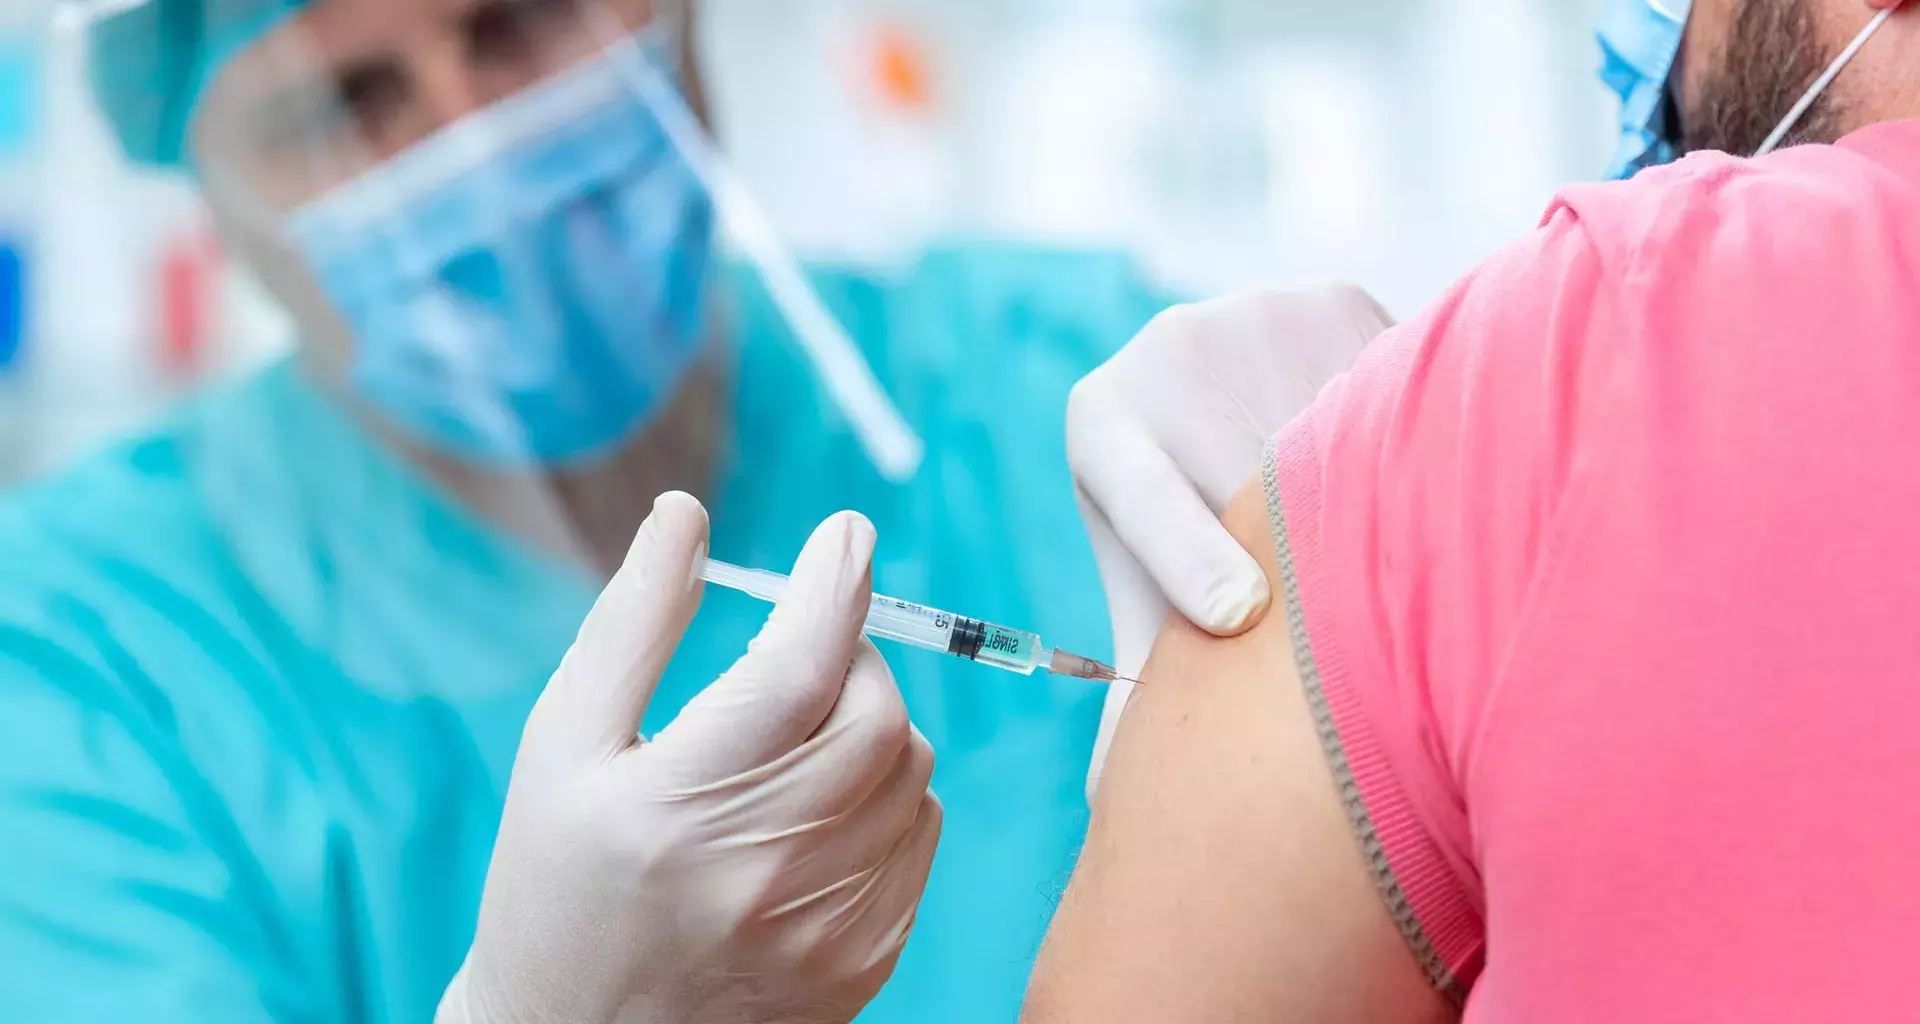 TecSalud to take part in clinical trial of new German vaccine